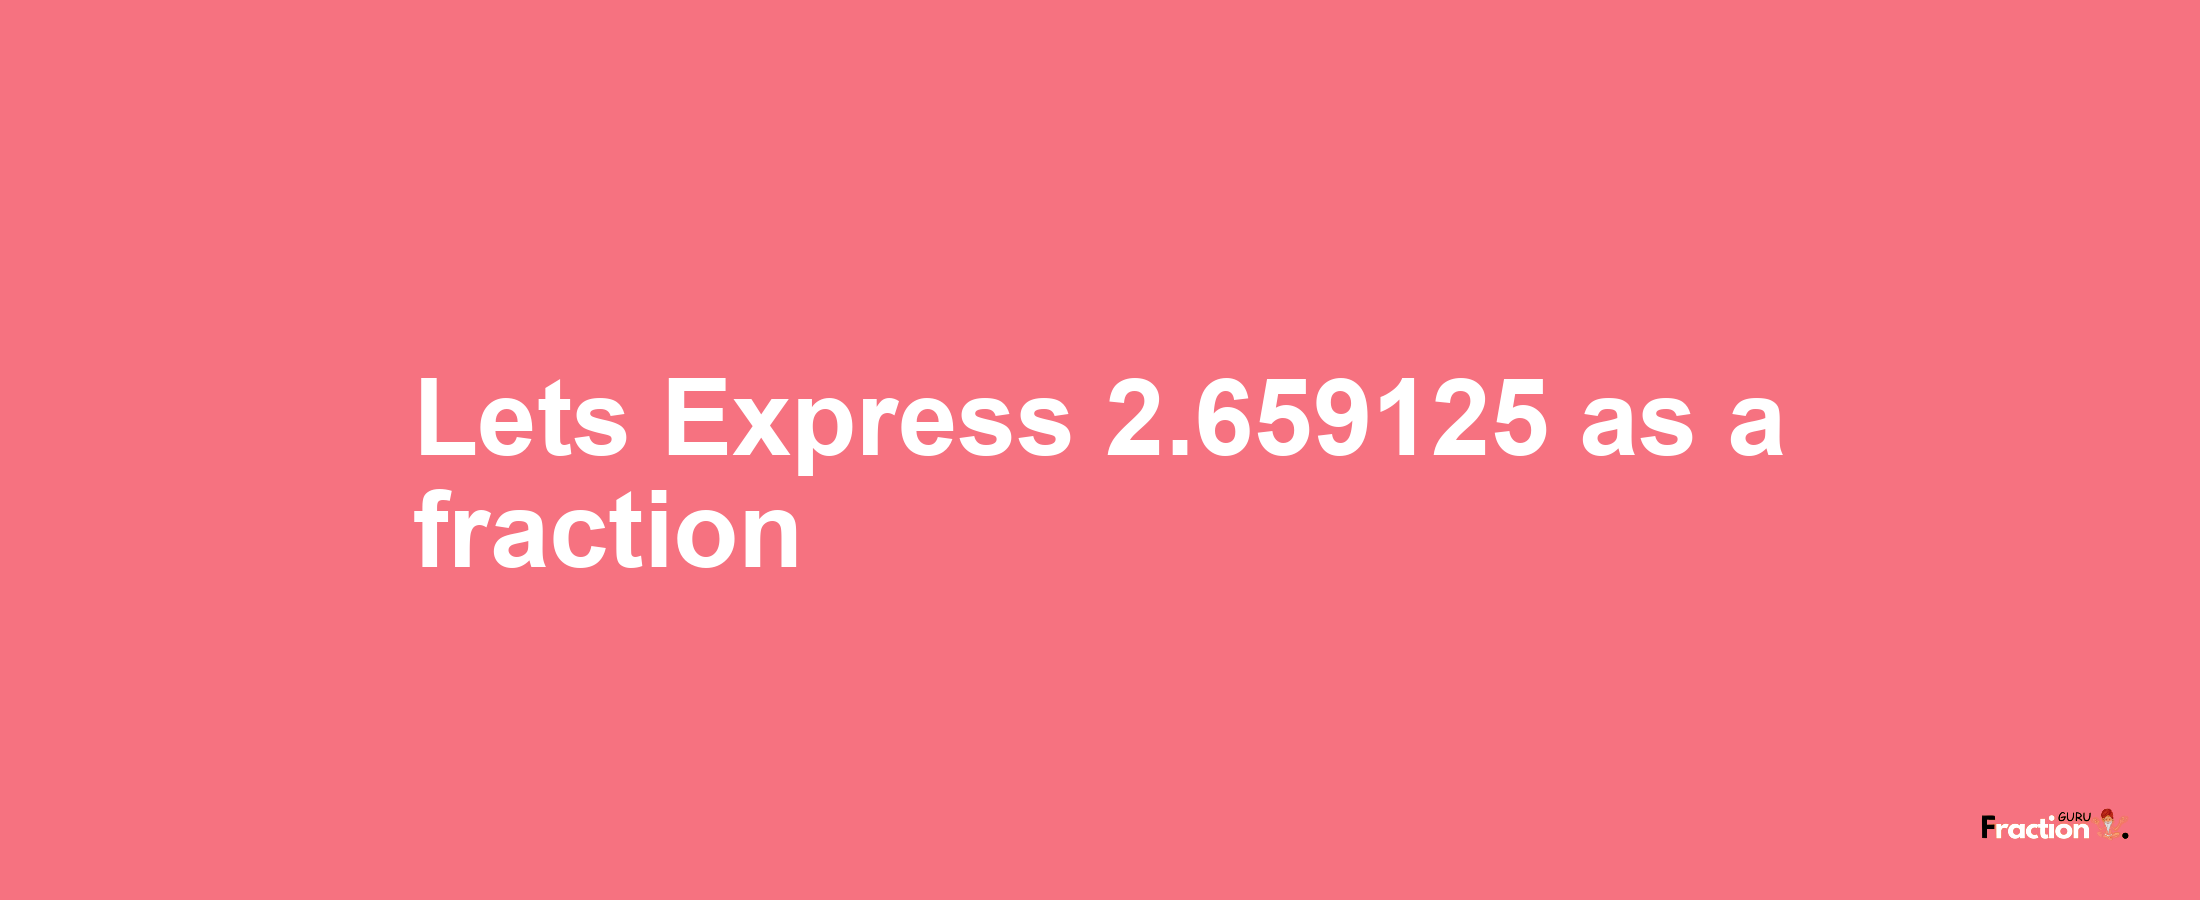 Lets Express 2.659125 as afraction